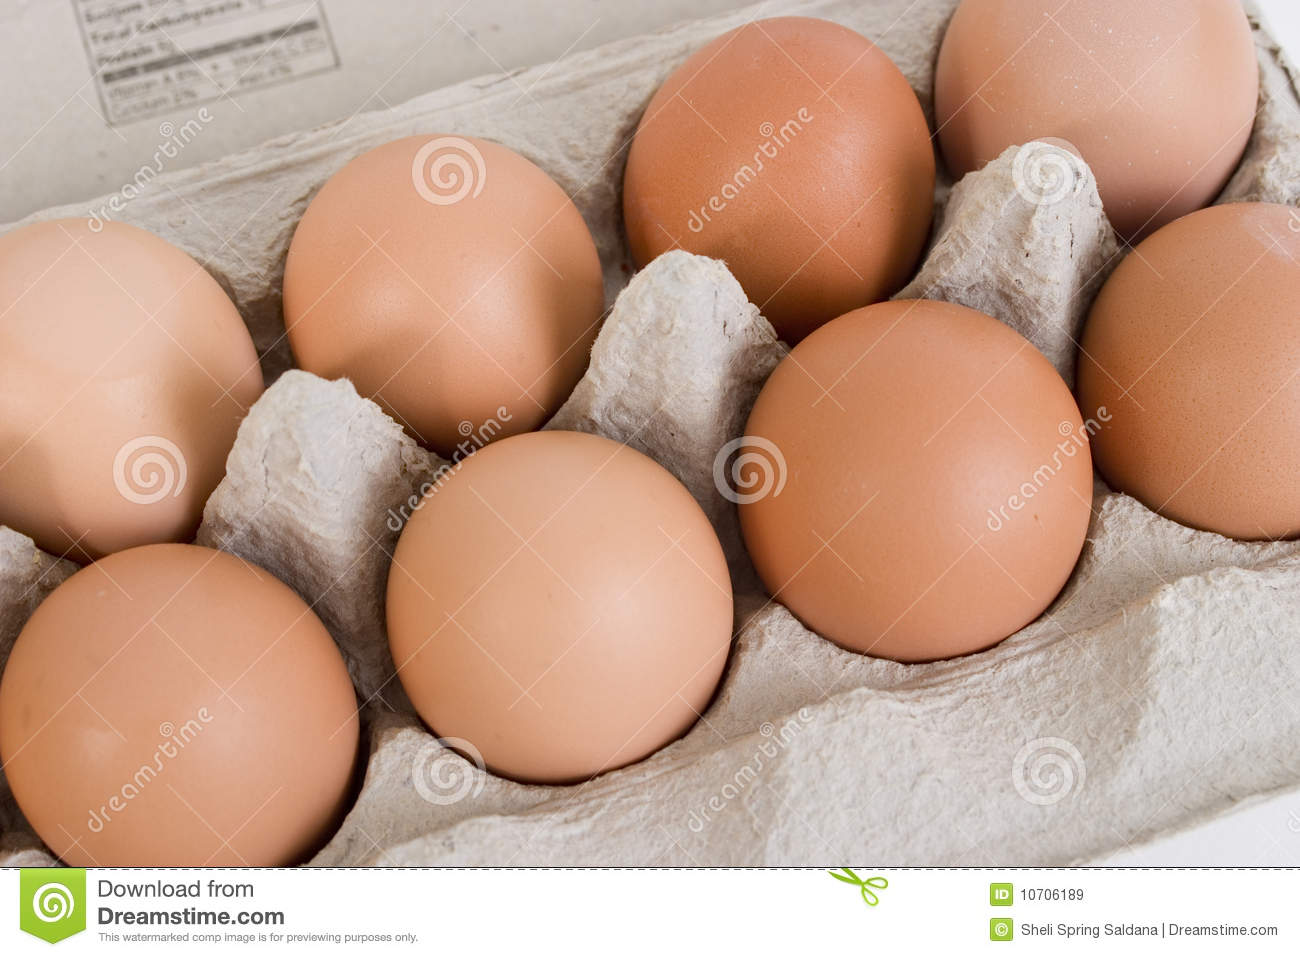 Brown Eggs In Paper Carton Royalty Free Stock Images   Image  10706189